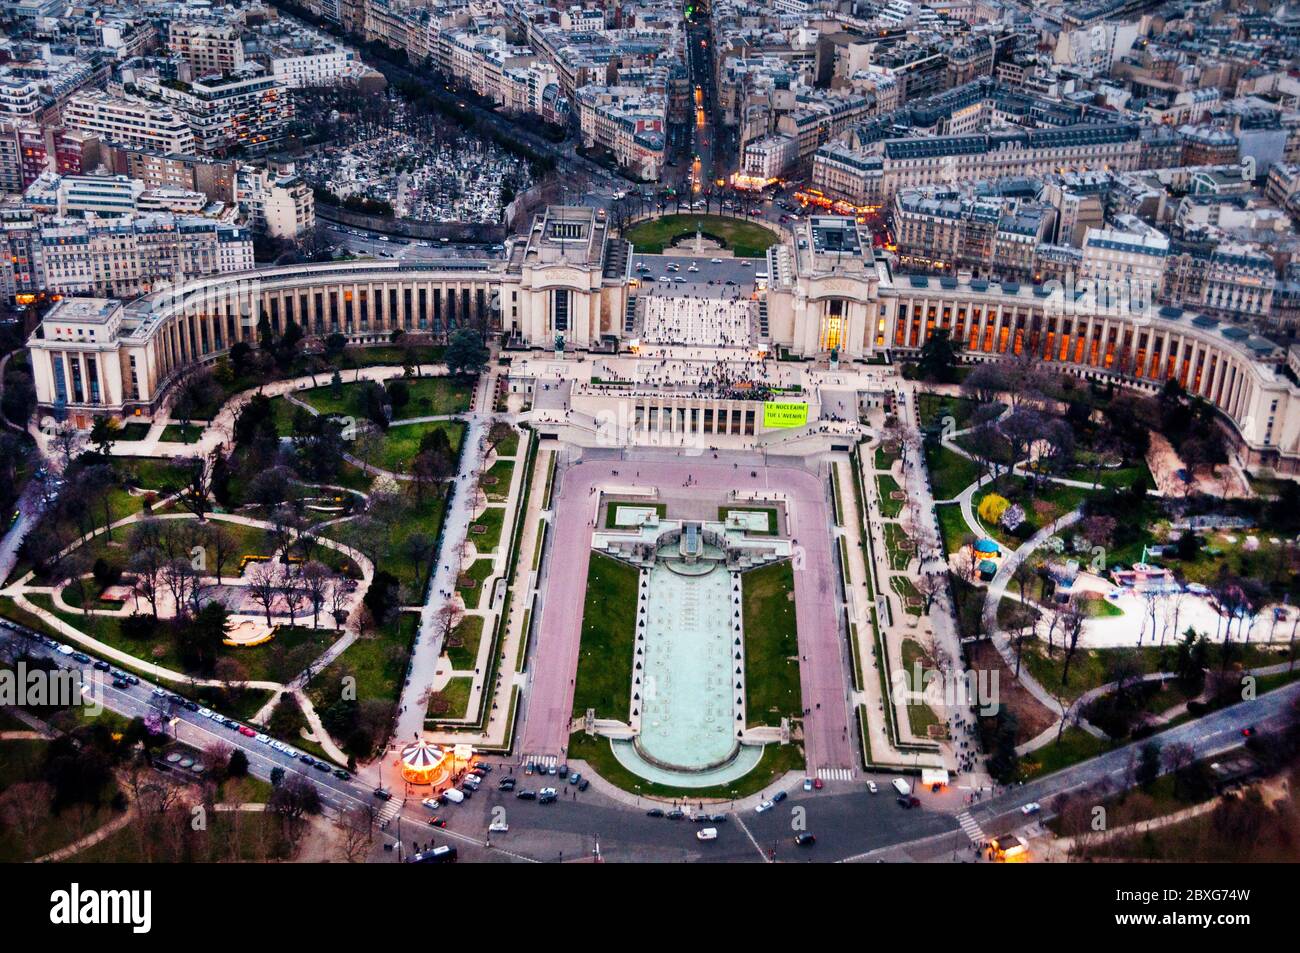 View from the Eiffel Tower of the Gardens of the Trocadero and Palais de Chaillot and a carousel in Paris, France. Stock Photo